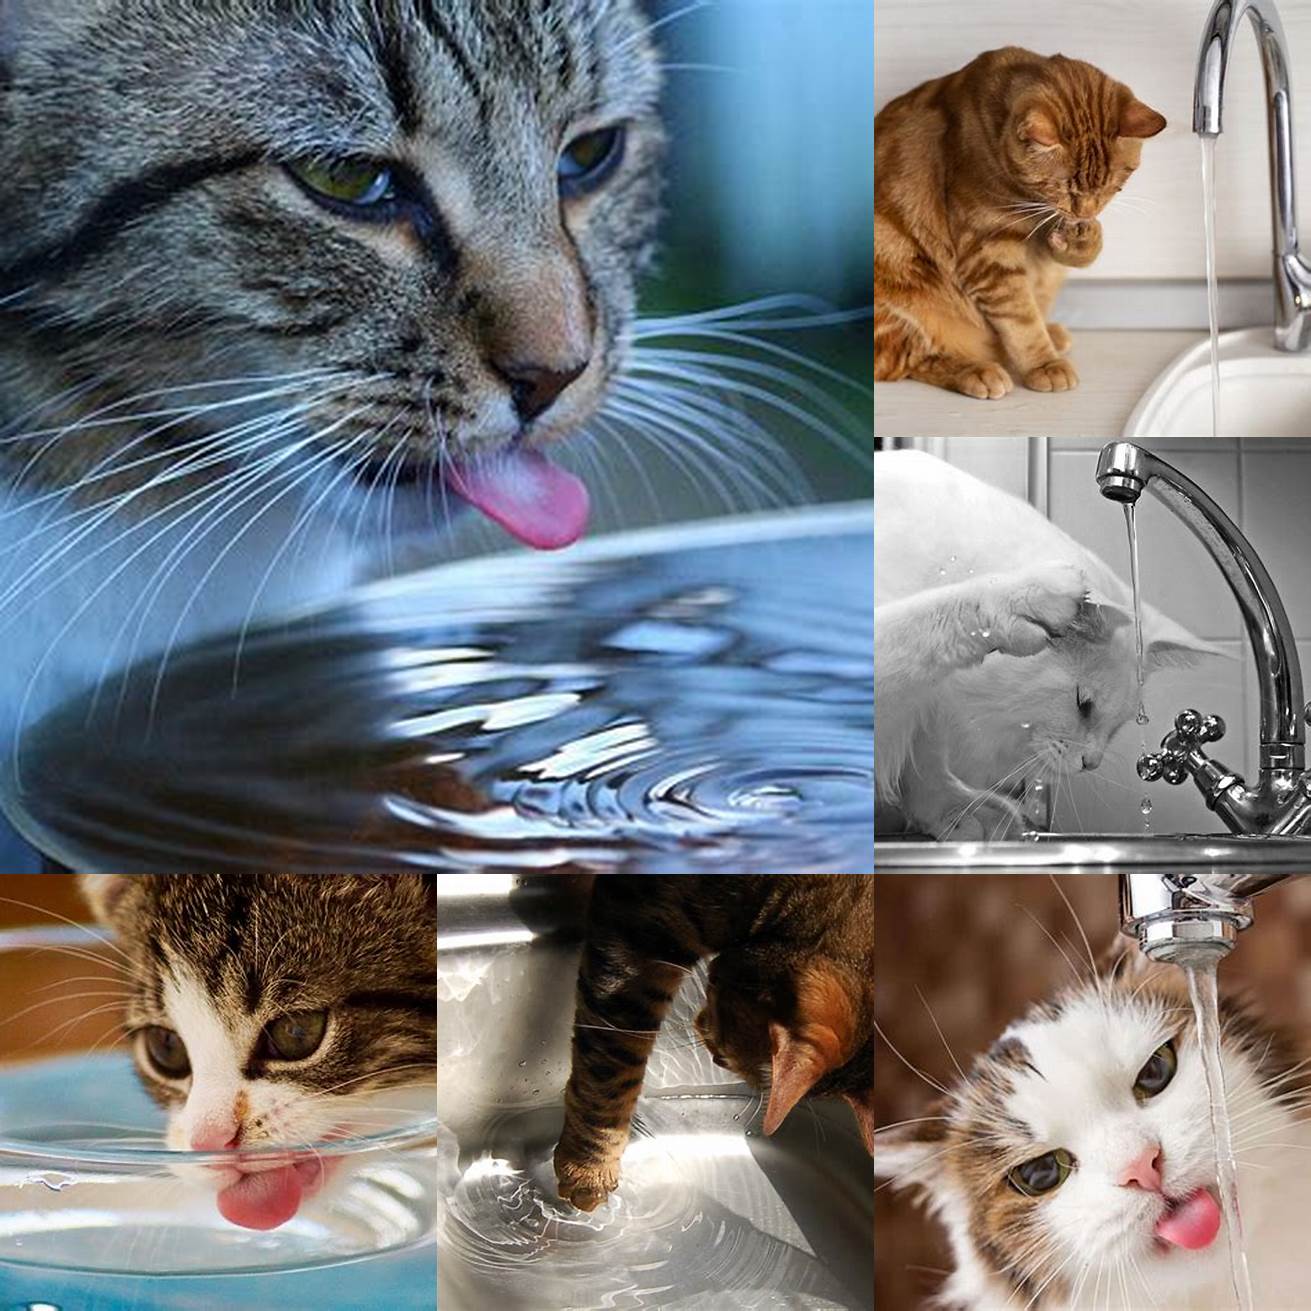 Cats may also drink water with their paws because they enjoy playing with water